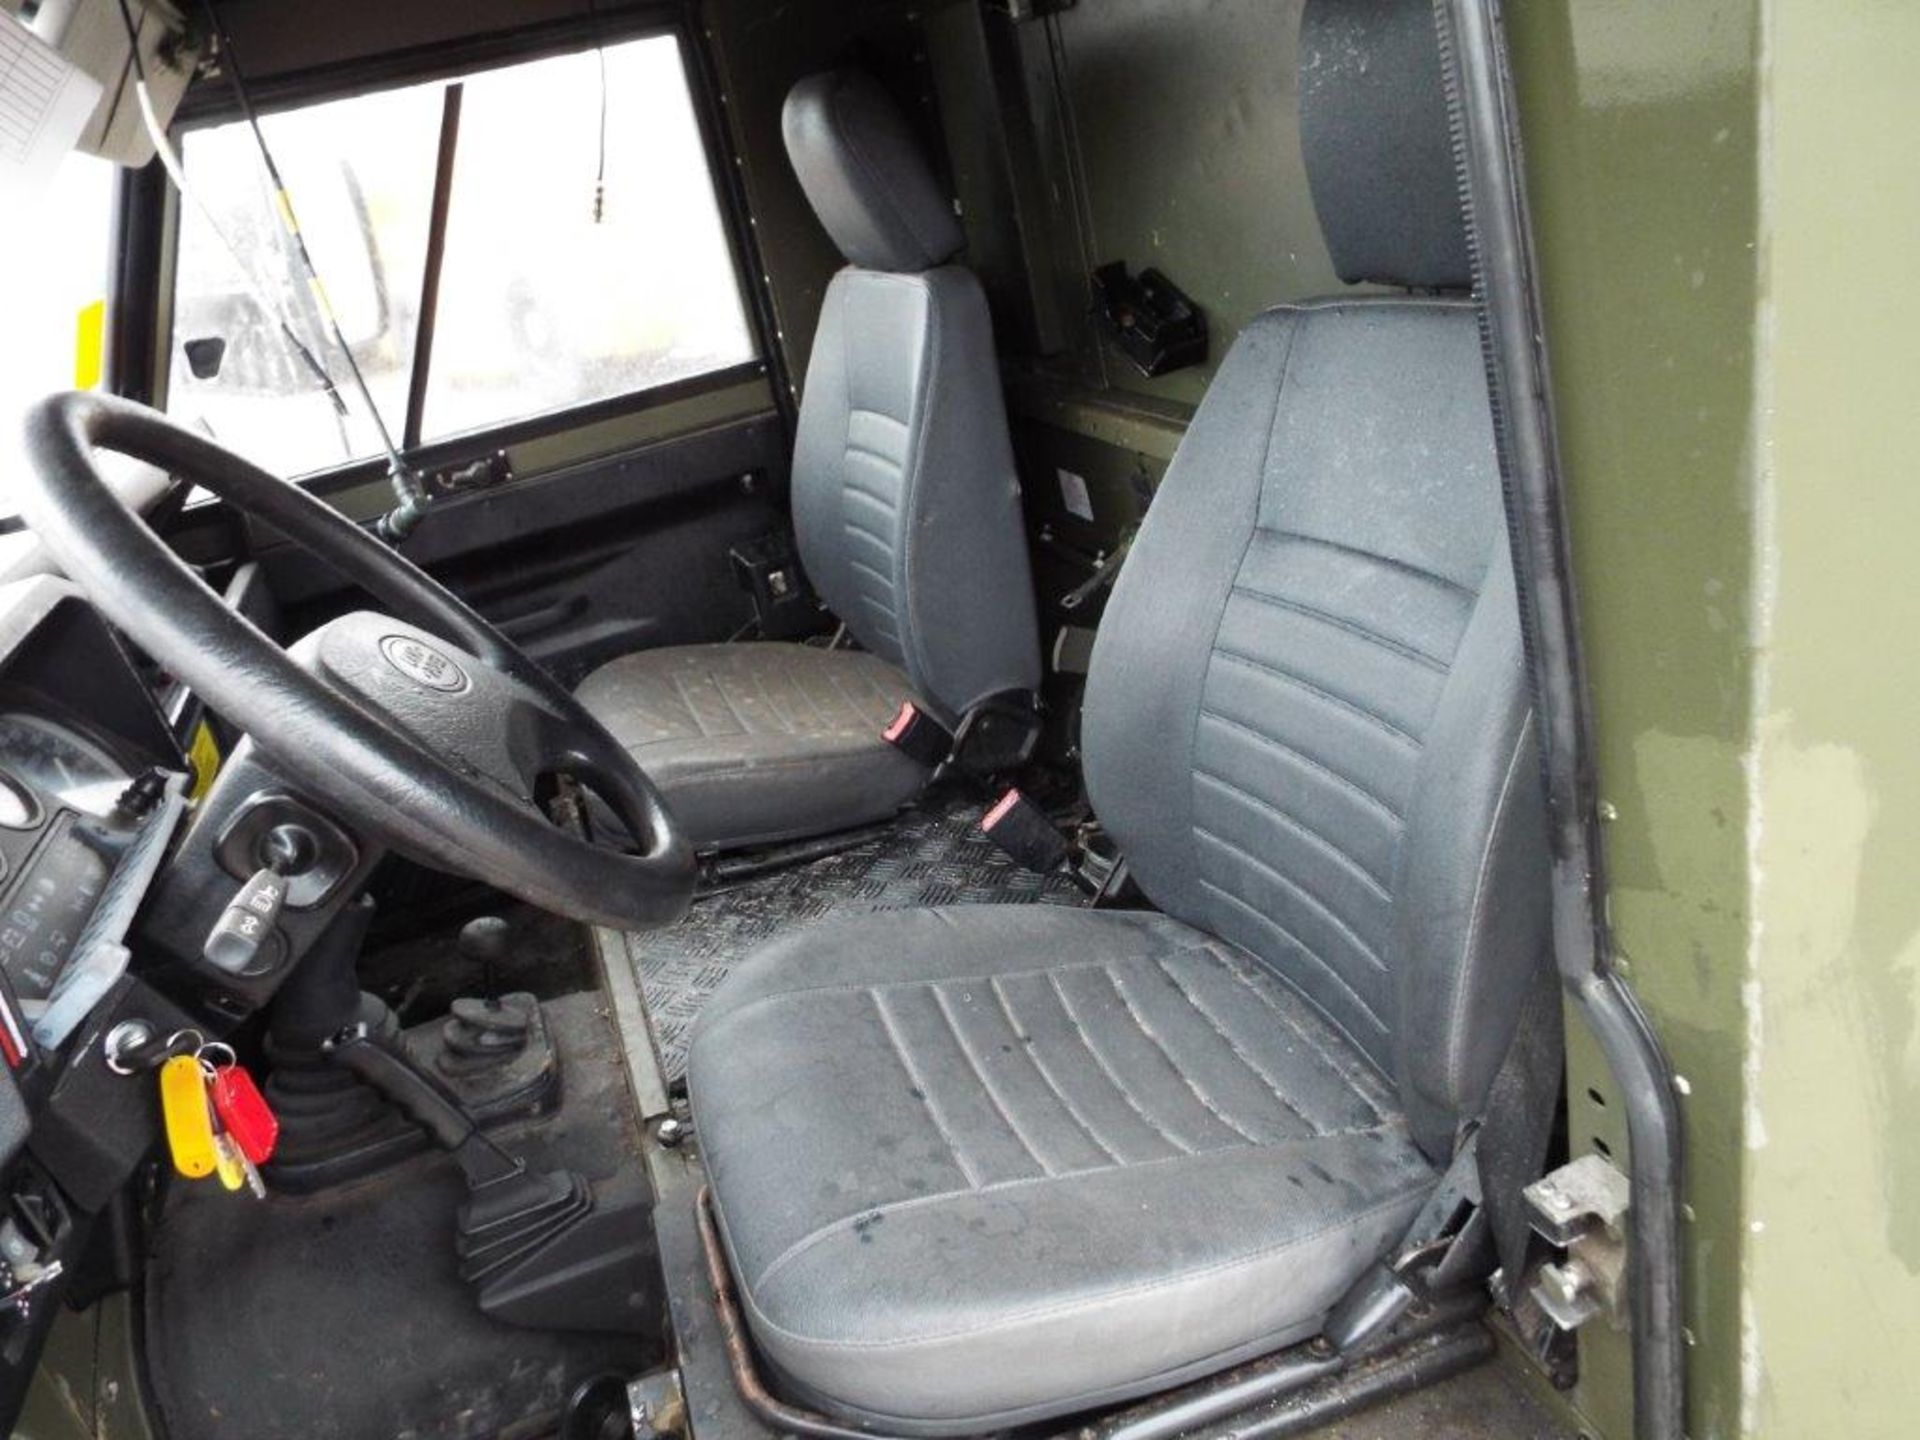 Military Specification LHD Land Rover Wolf 130 Ambulance - Image 11 of 23